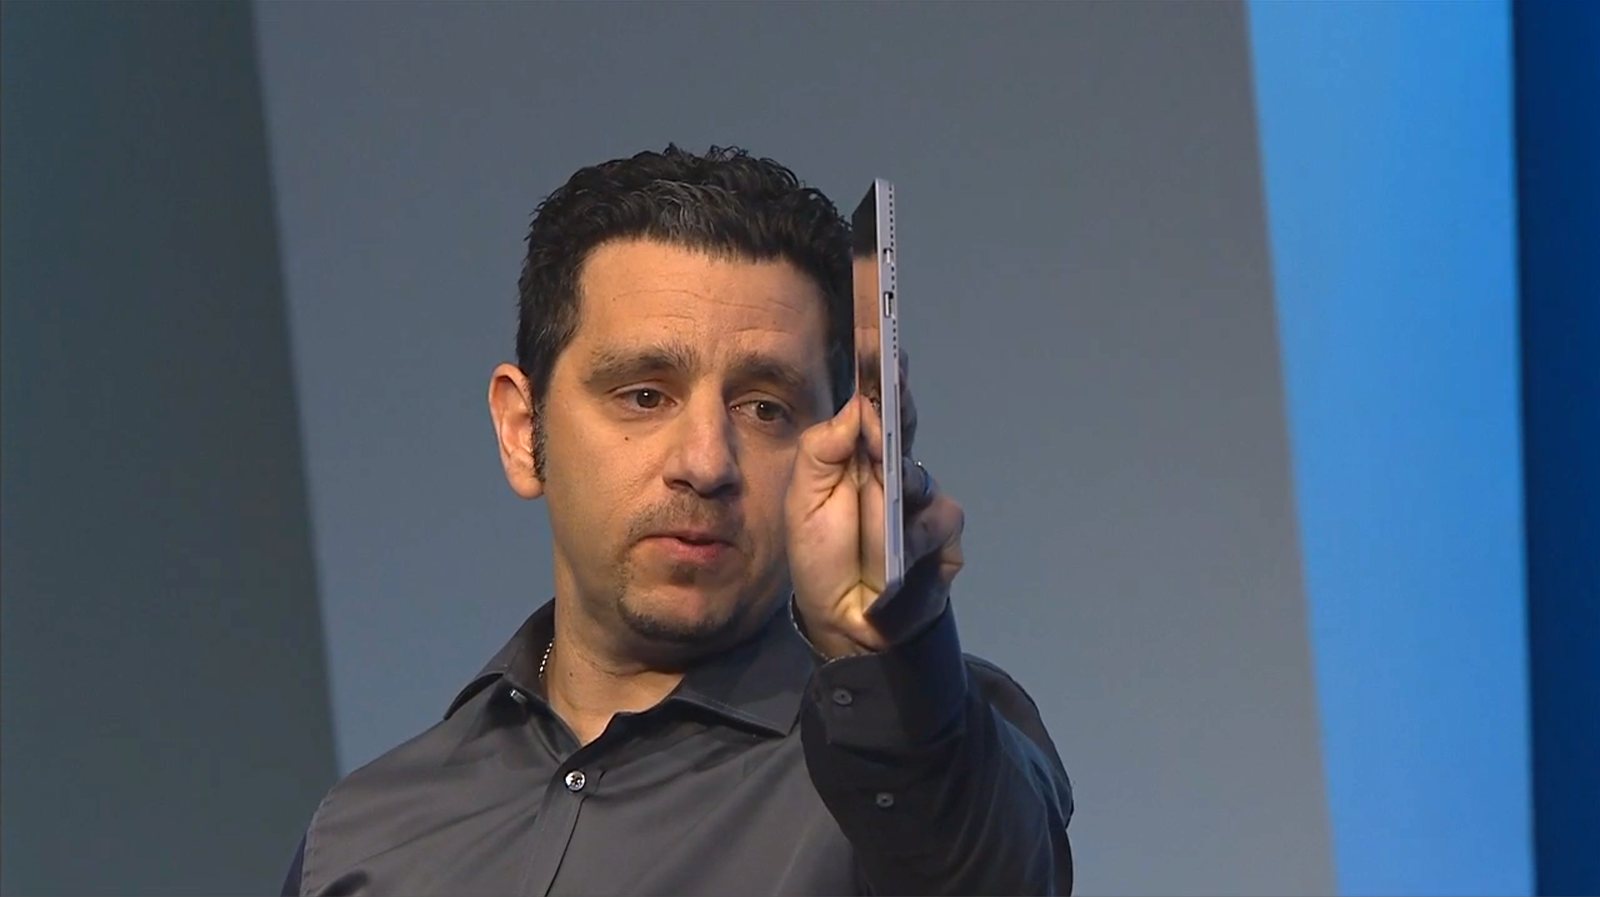 Panos Panay holds the device edge-on for the audience to see how thin it is.